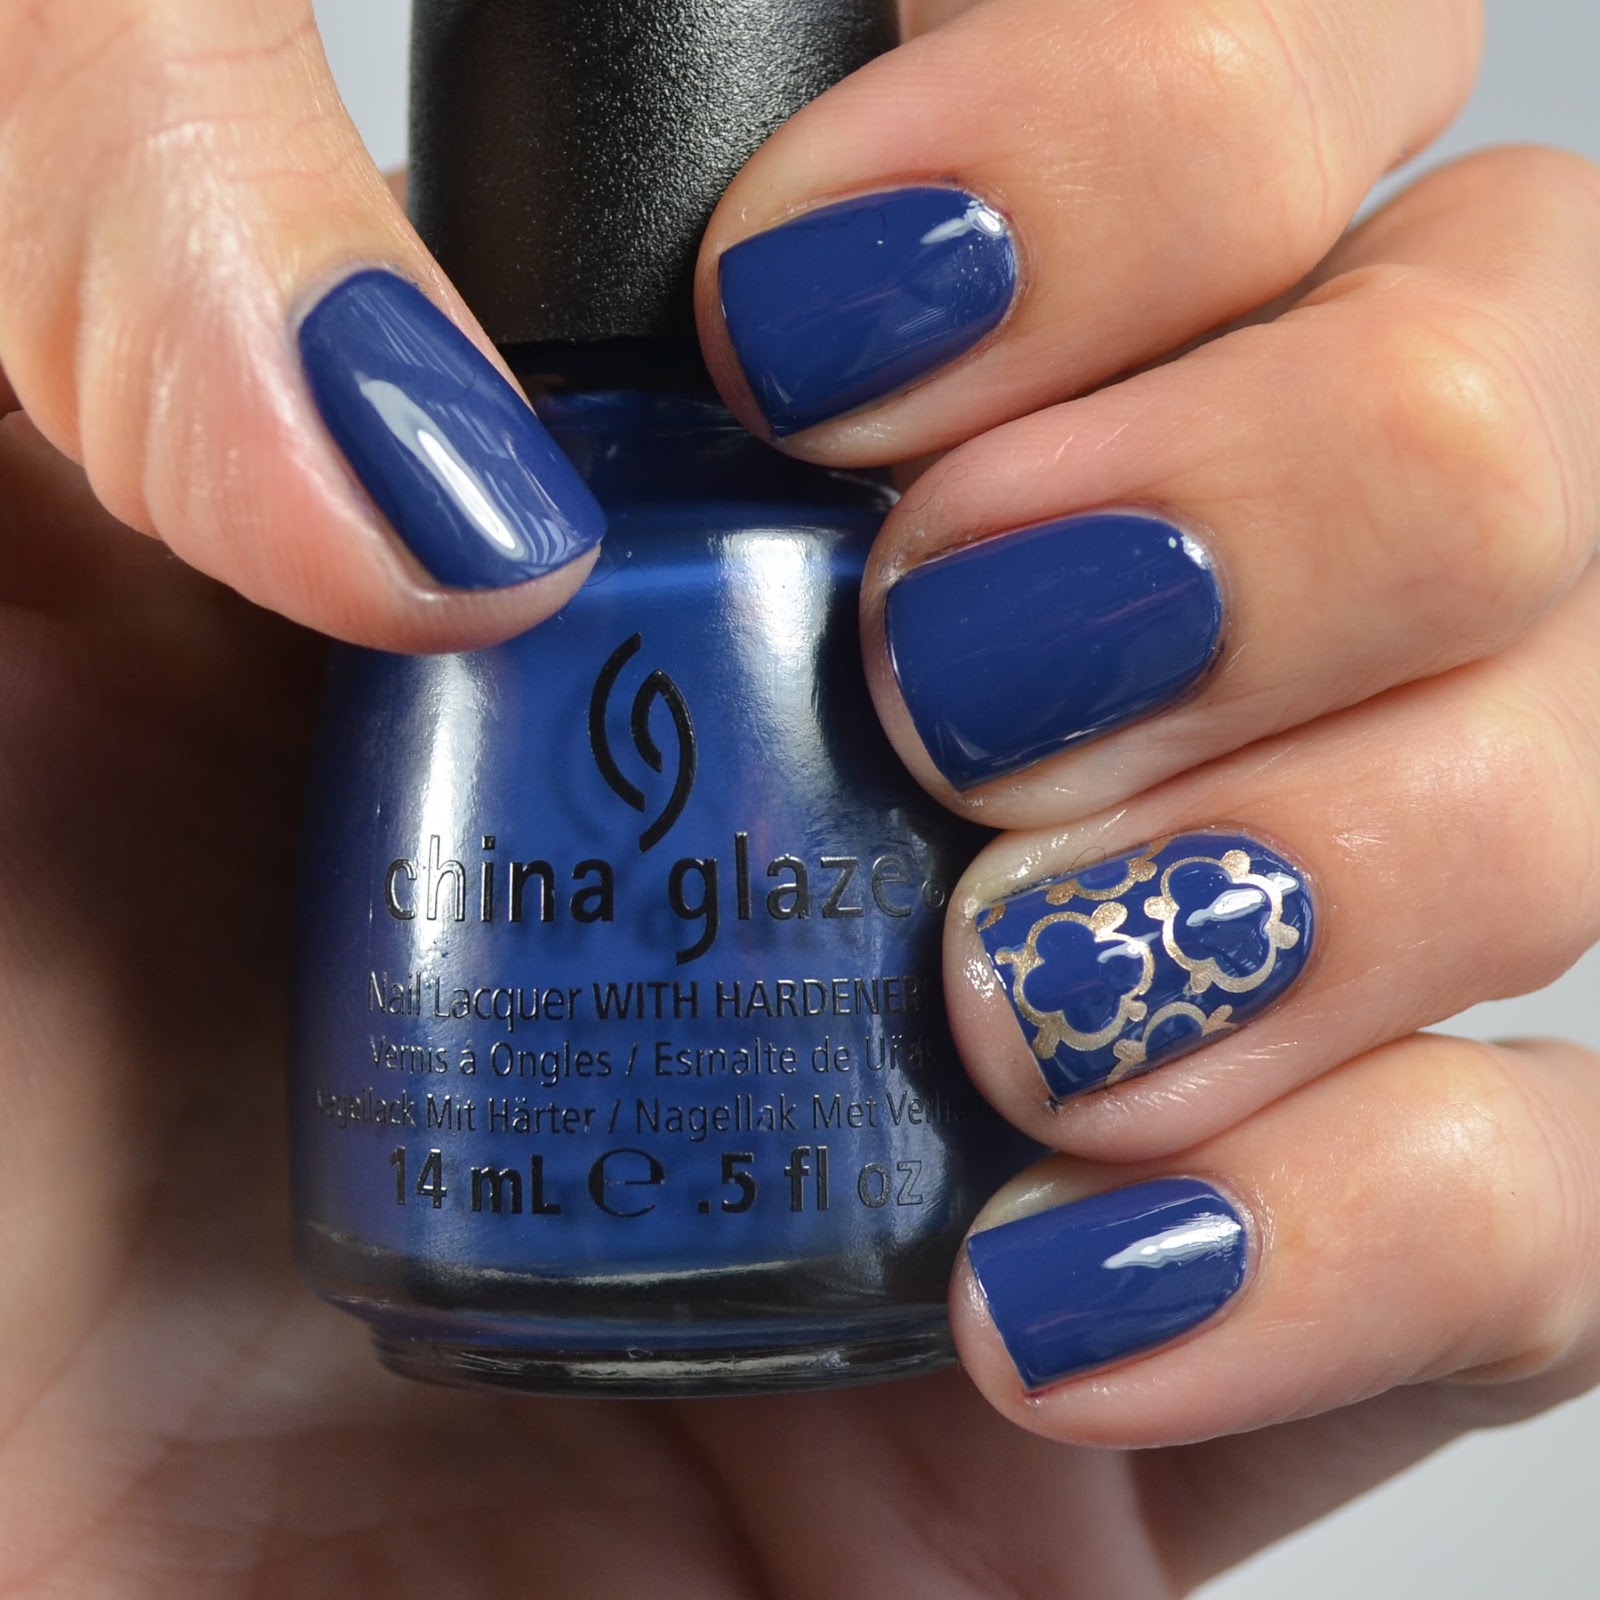 Go Polished: My #10 Favorite Fall Polish for 2015...